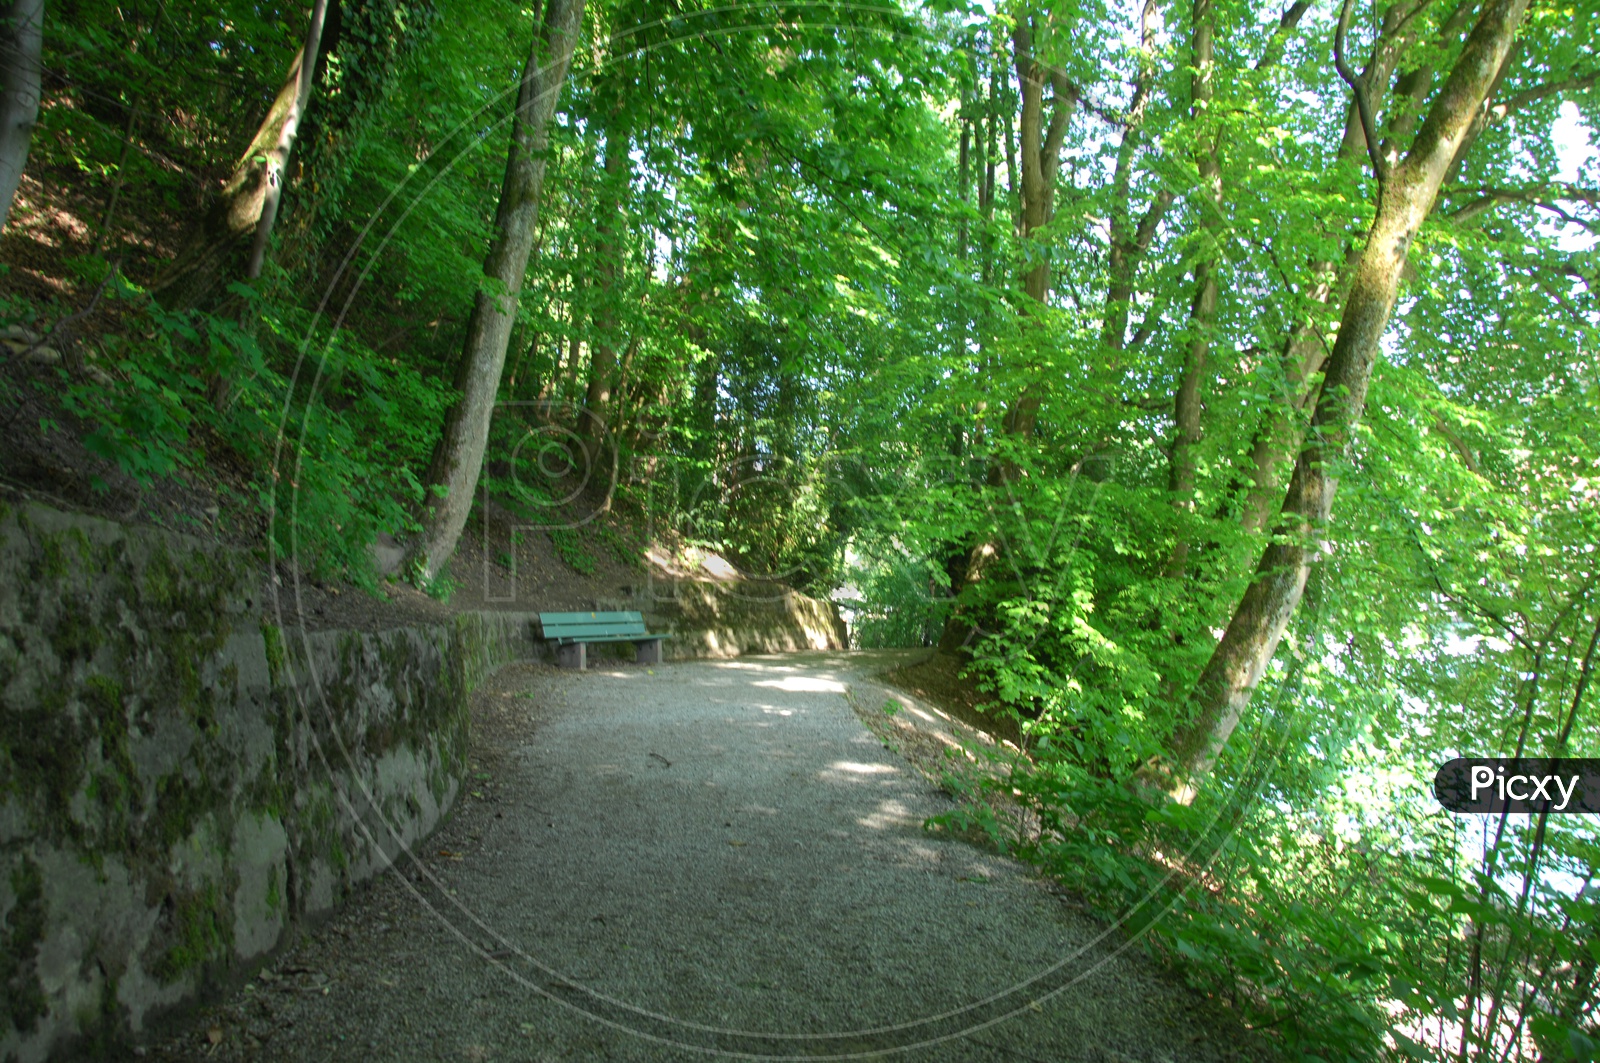 A narrow pathway along the trees